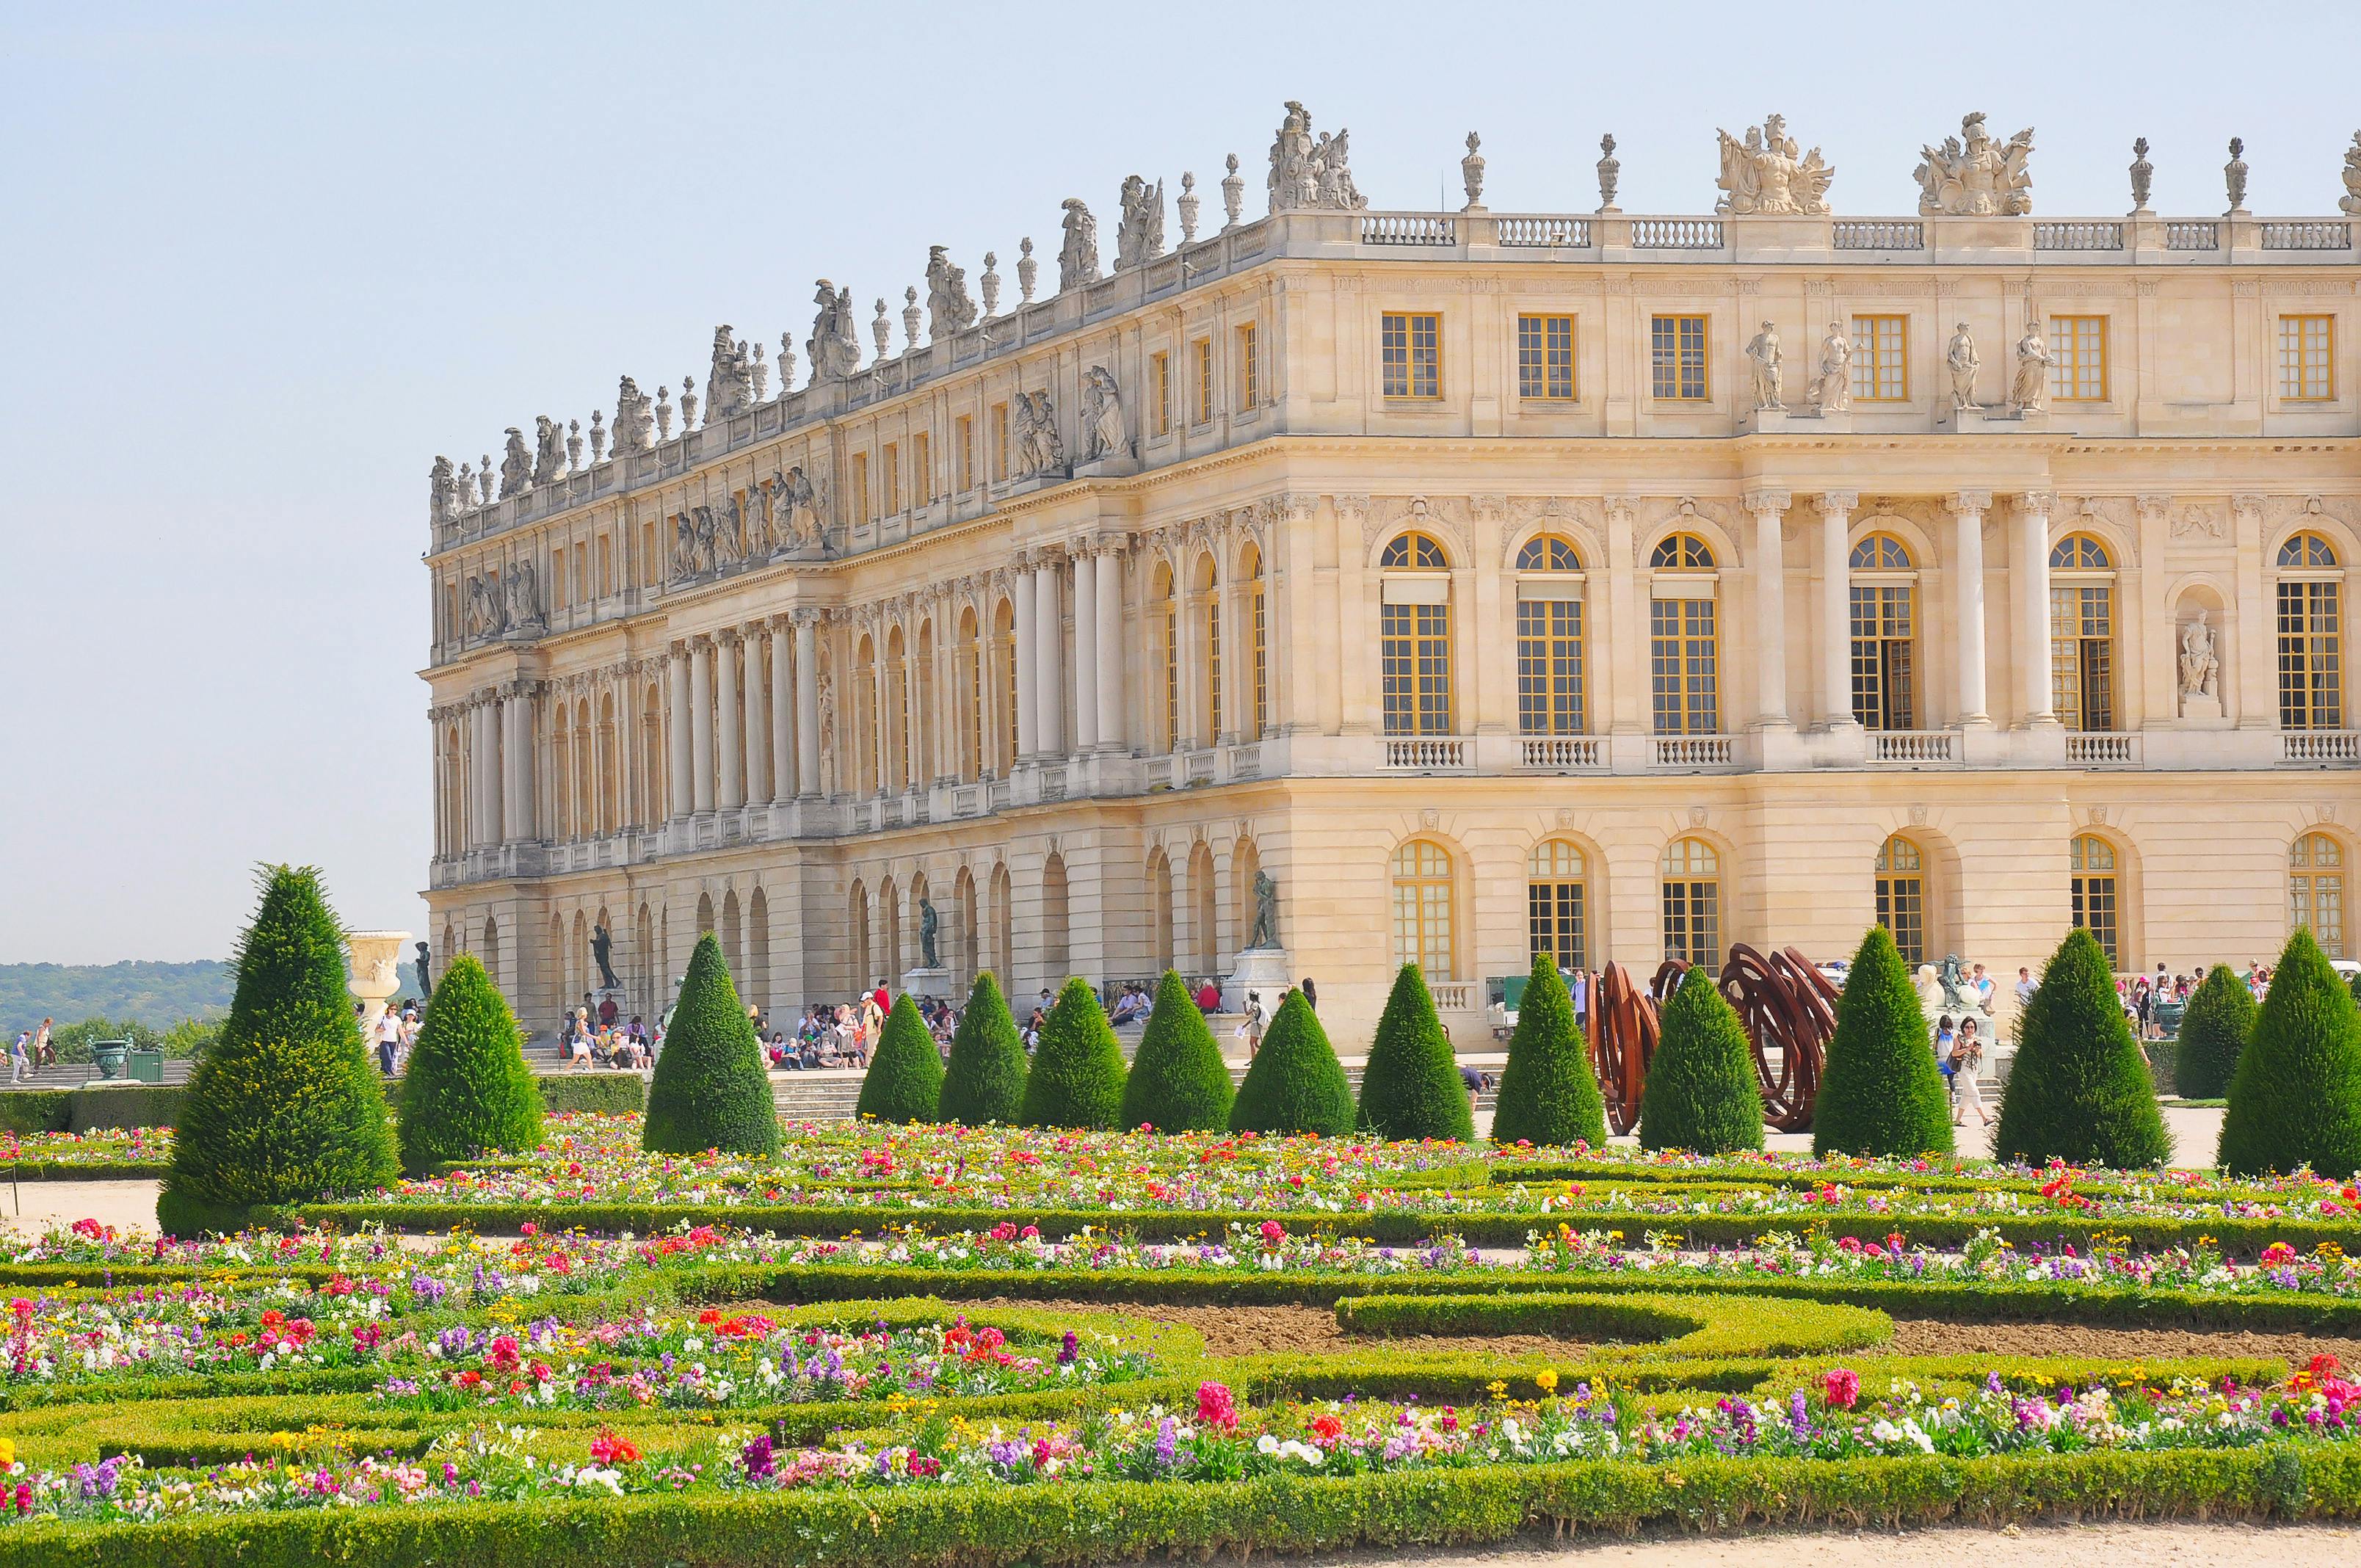 Guided tour of Versailles Palace and Giverny with transportation and lunch